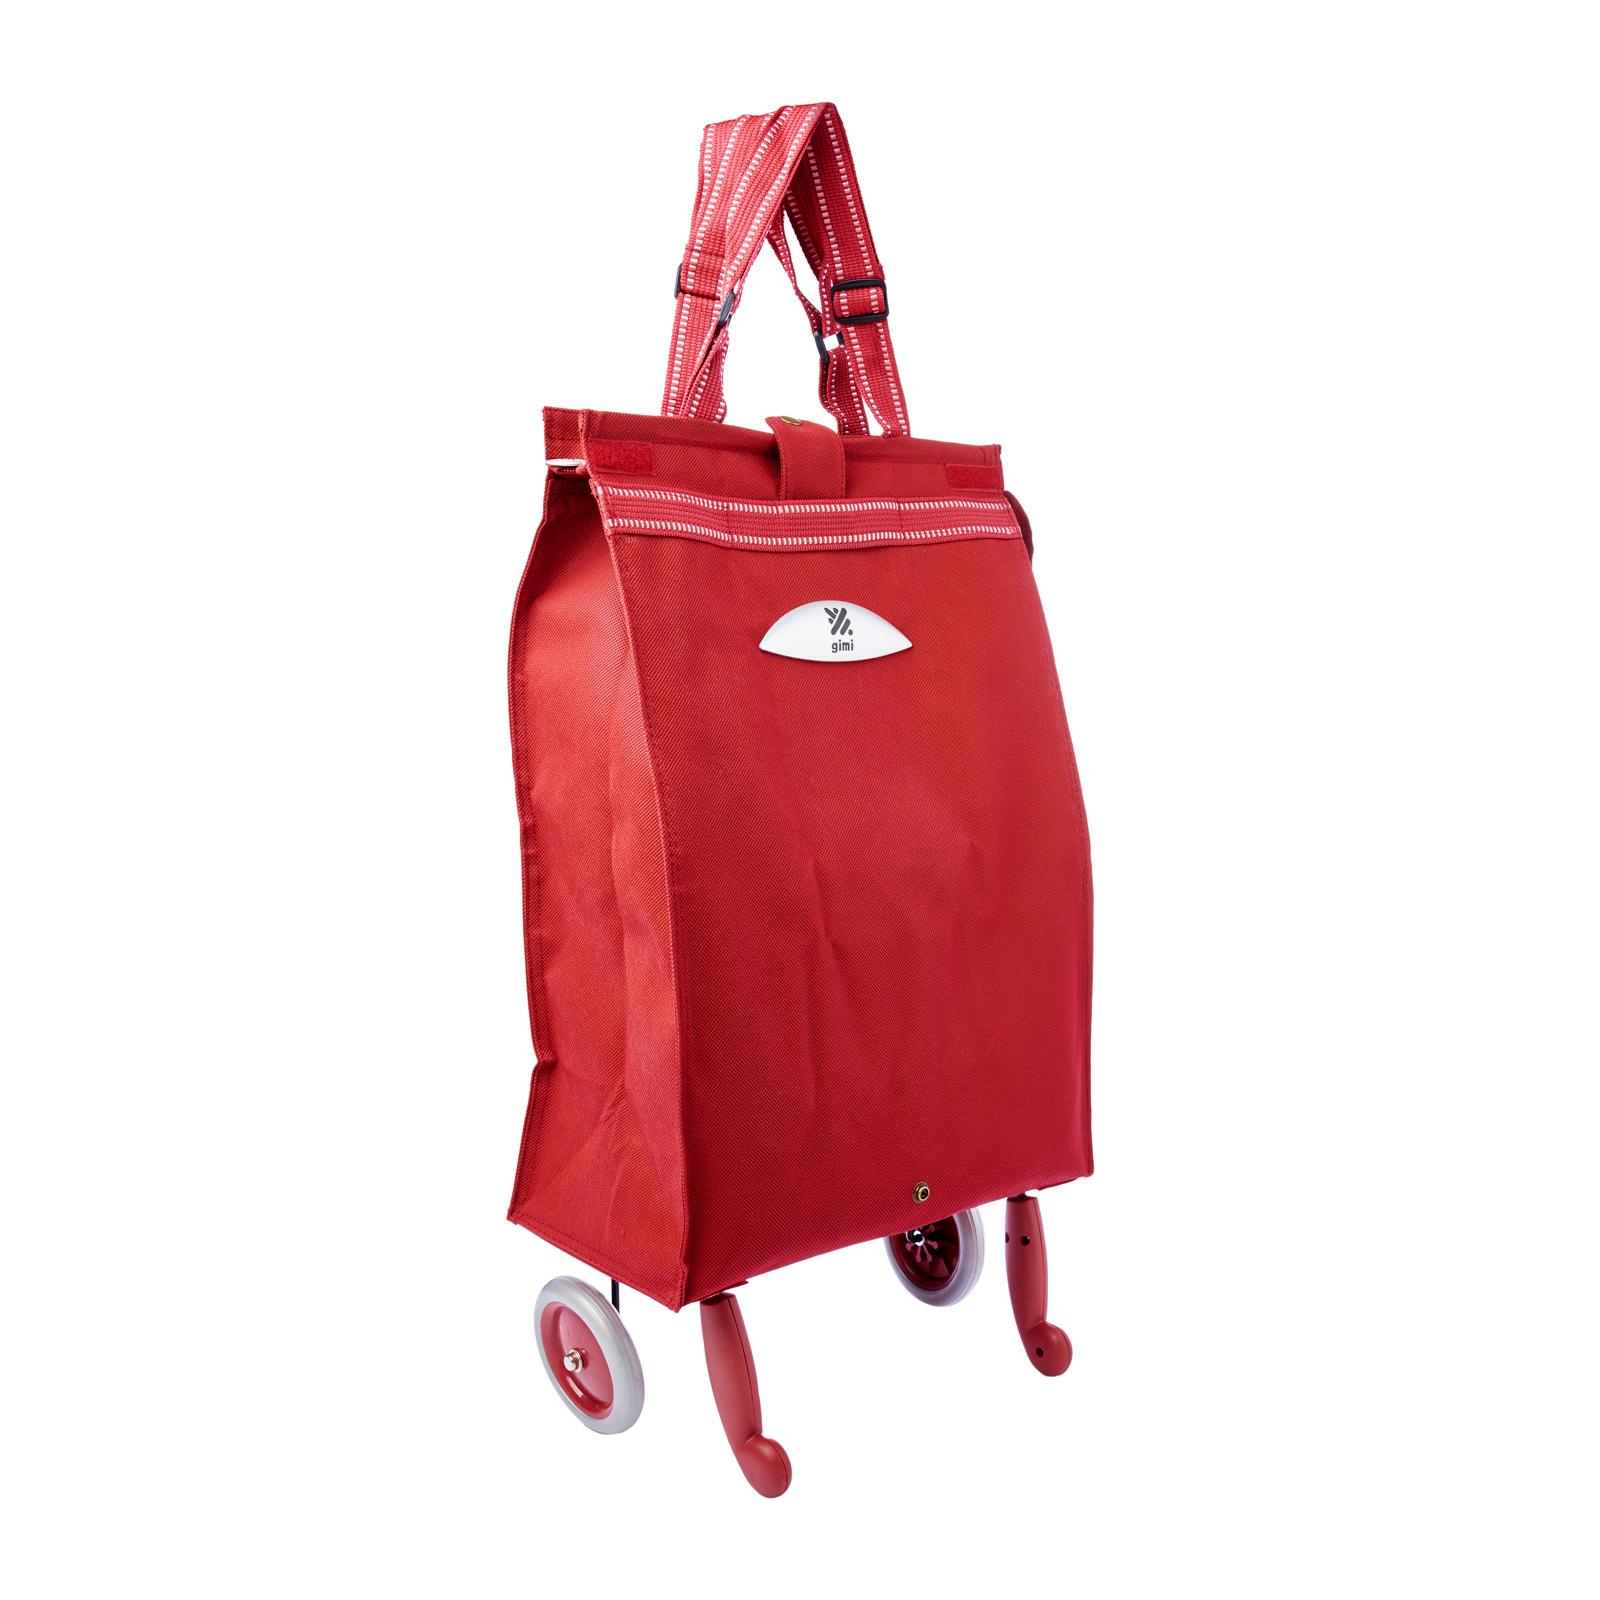 Are familiar reading Extremely important Gimi SHOPPING BAG BRAVA 38×22.5x69cm (Red) : POOLEE